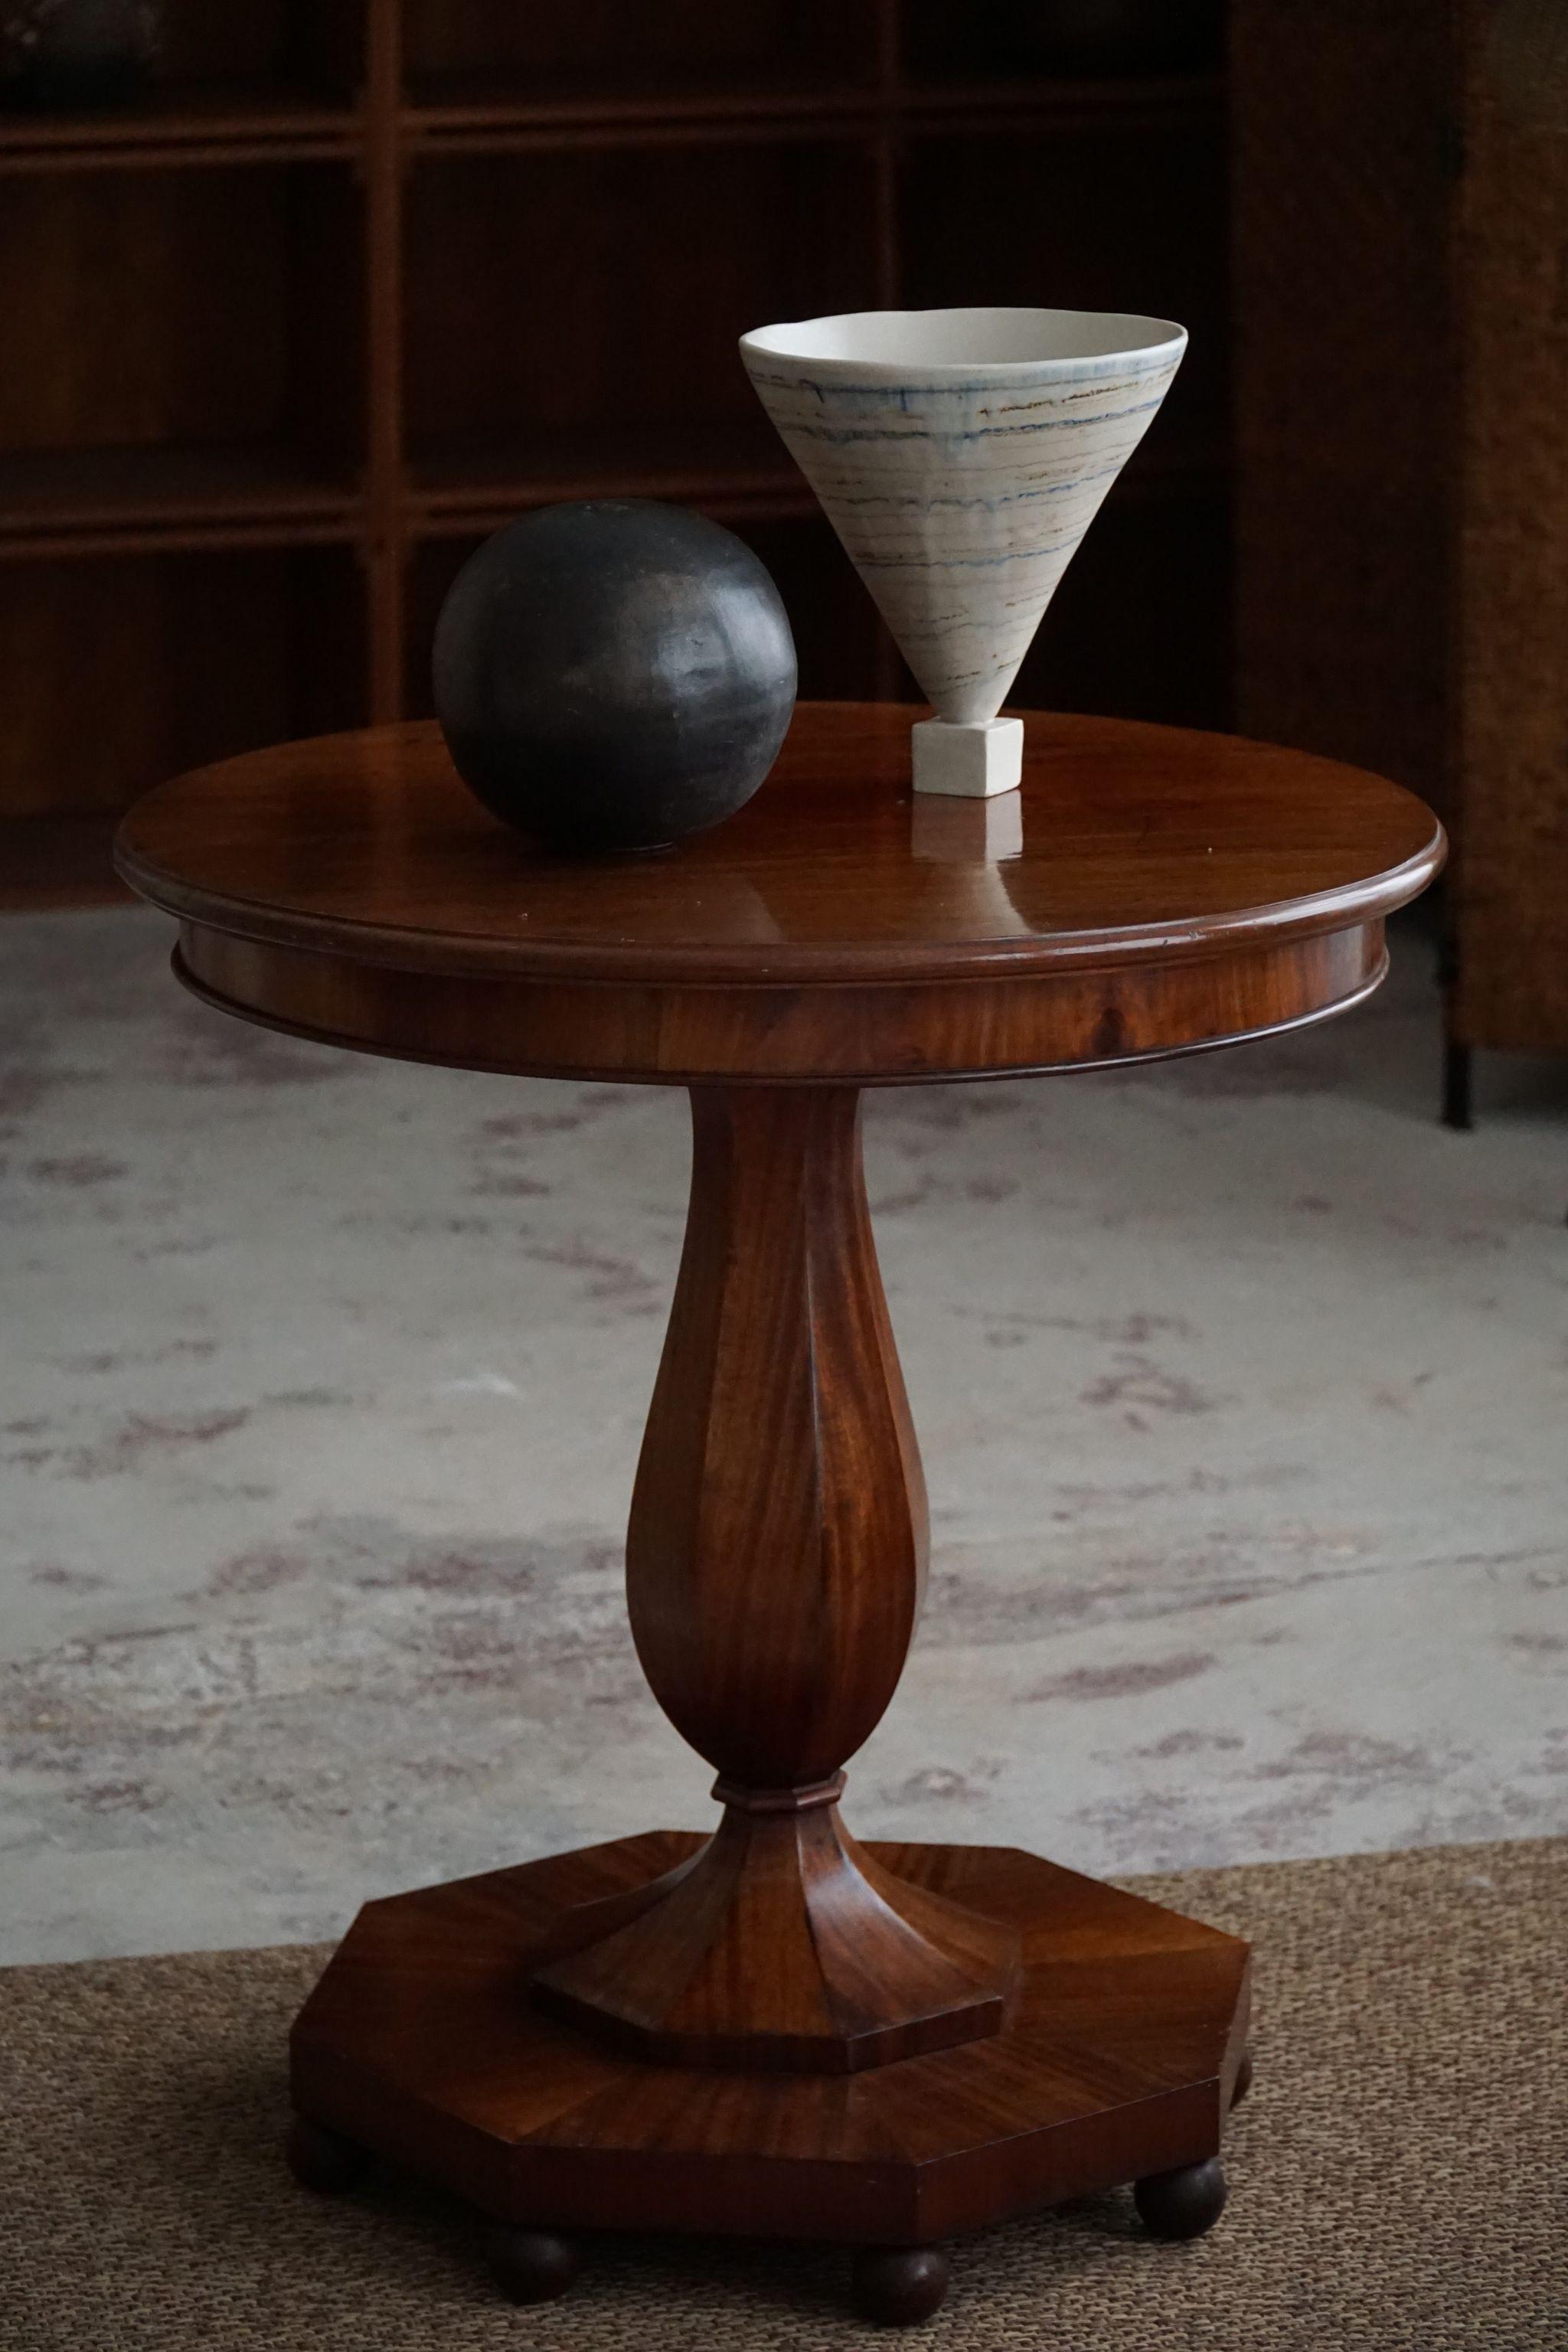 Art Deco, Round Pedestal / Side Table in Walnut, By a Danish Cabinetmaker, 1940s For Sale 1